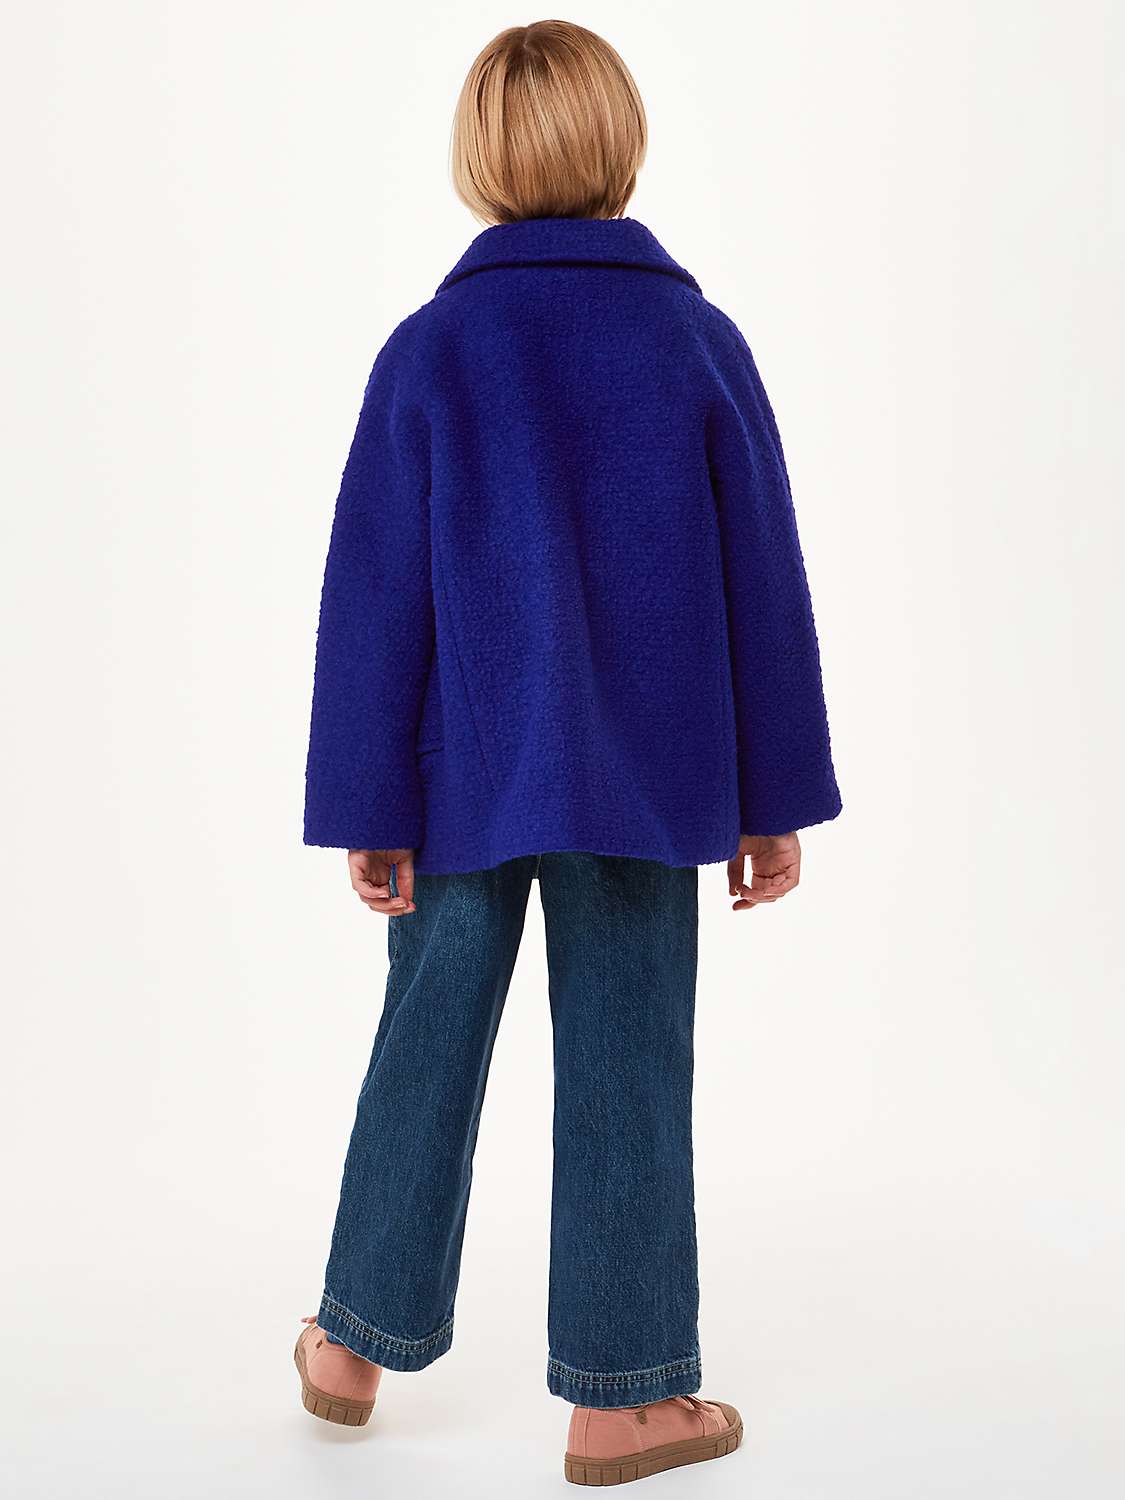 Buy Whistles Kids' Daisy Boucle Wool Blend Coat, Blue Online at johnlewis.com